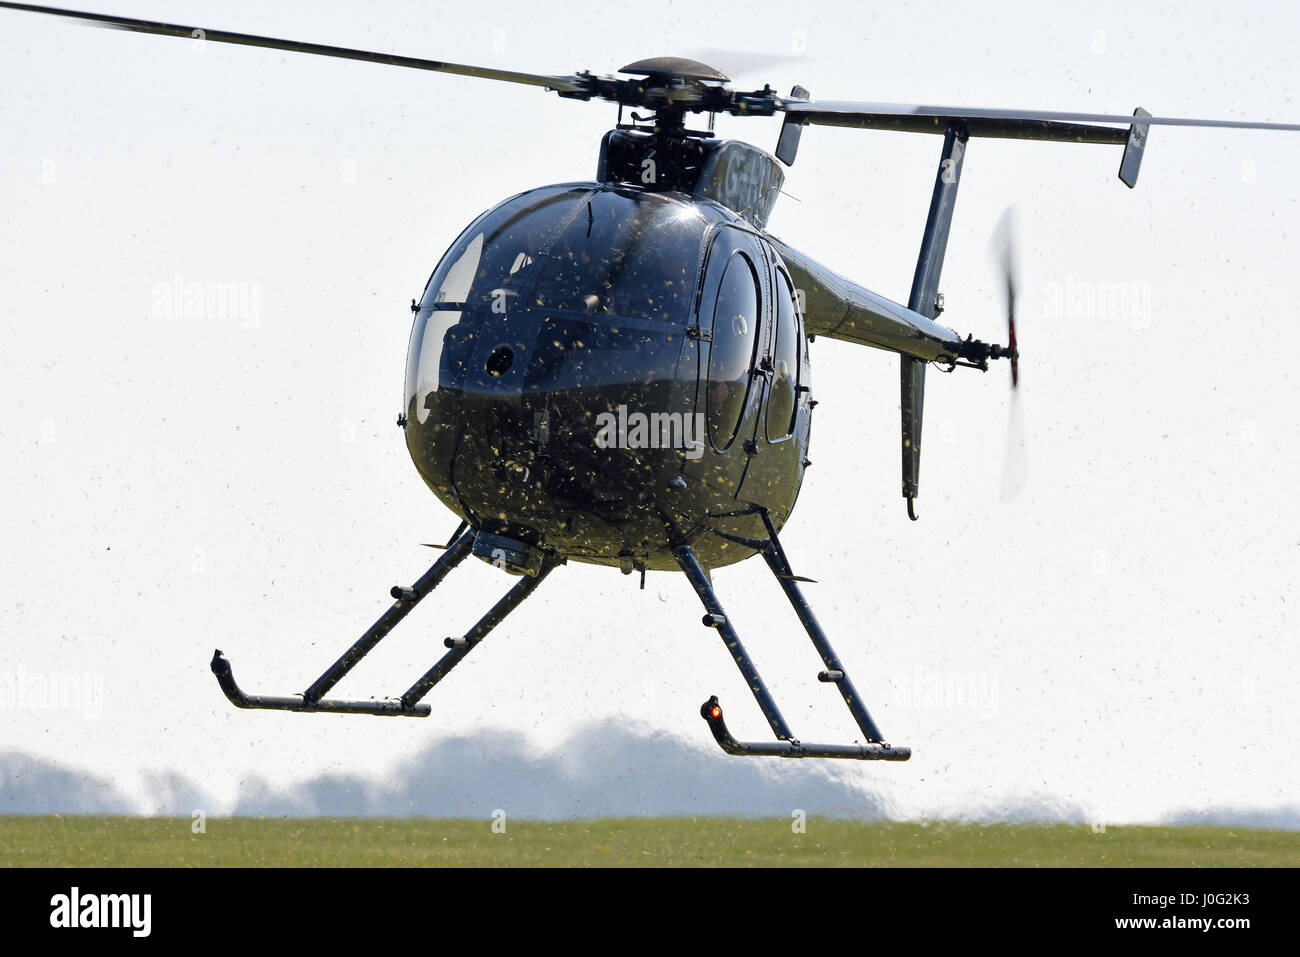 MD Hughes 500 helicopter G-HUEZ owned by Falcon Helicopters Ltd landing and blowing up grass cuttings Stock Photo